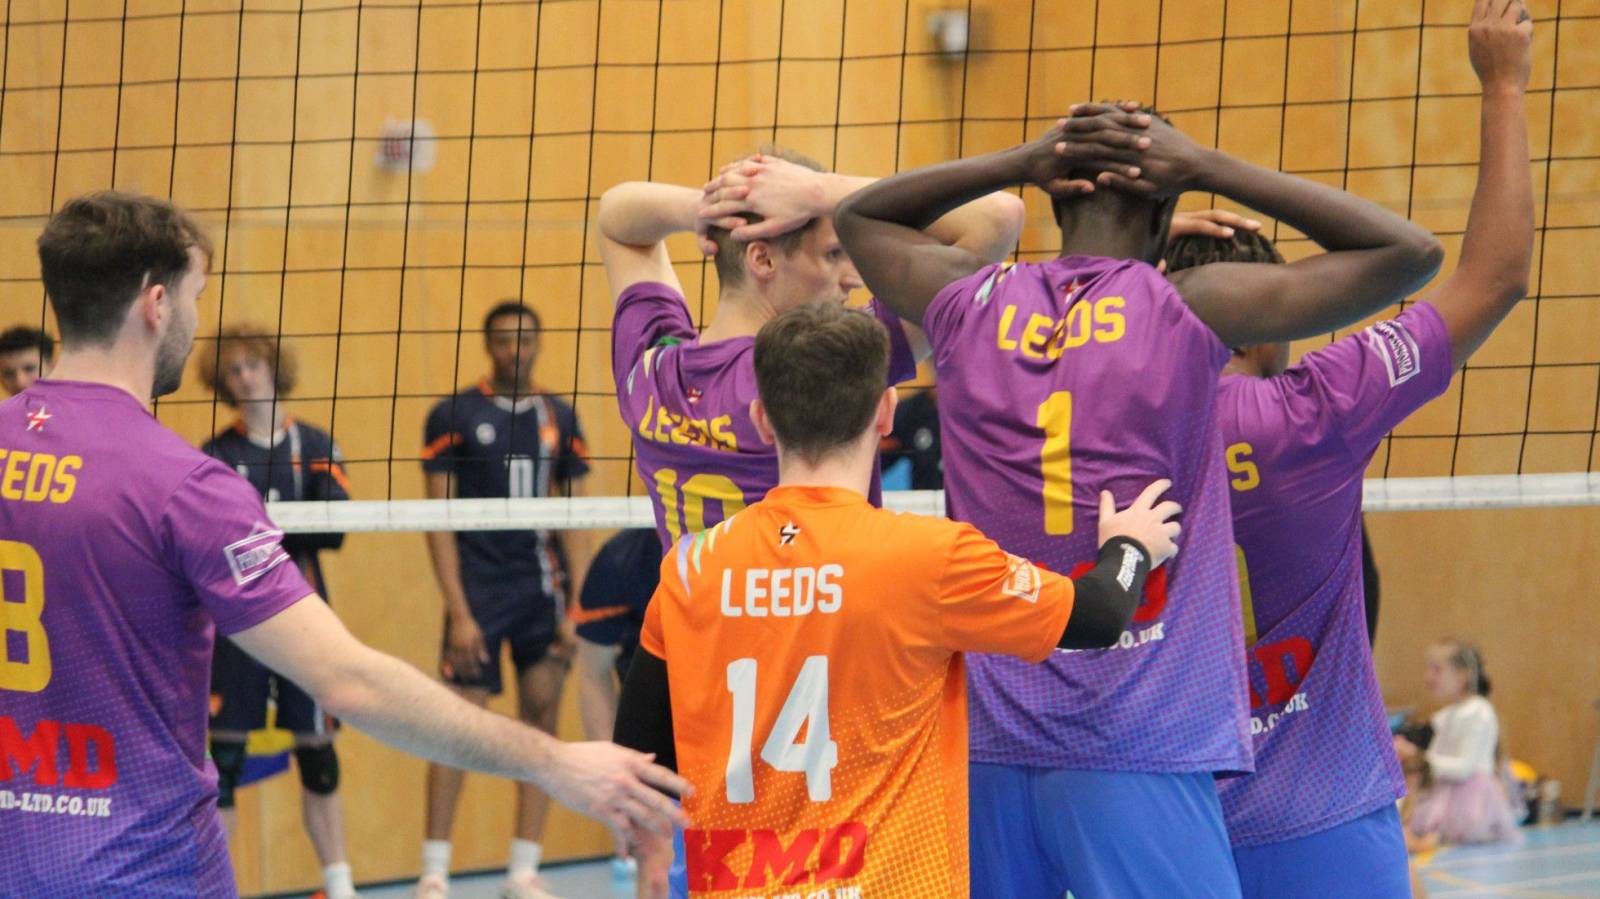 National Shield and Cup preview (11th November and 12 November): NVL clubs eye Super League upsets